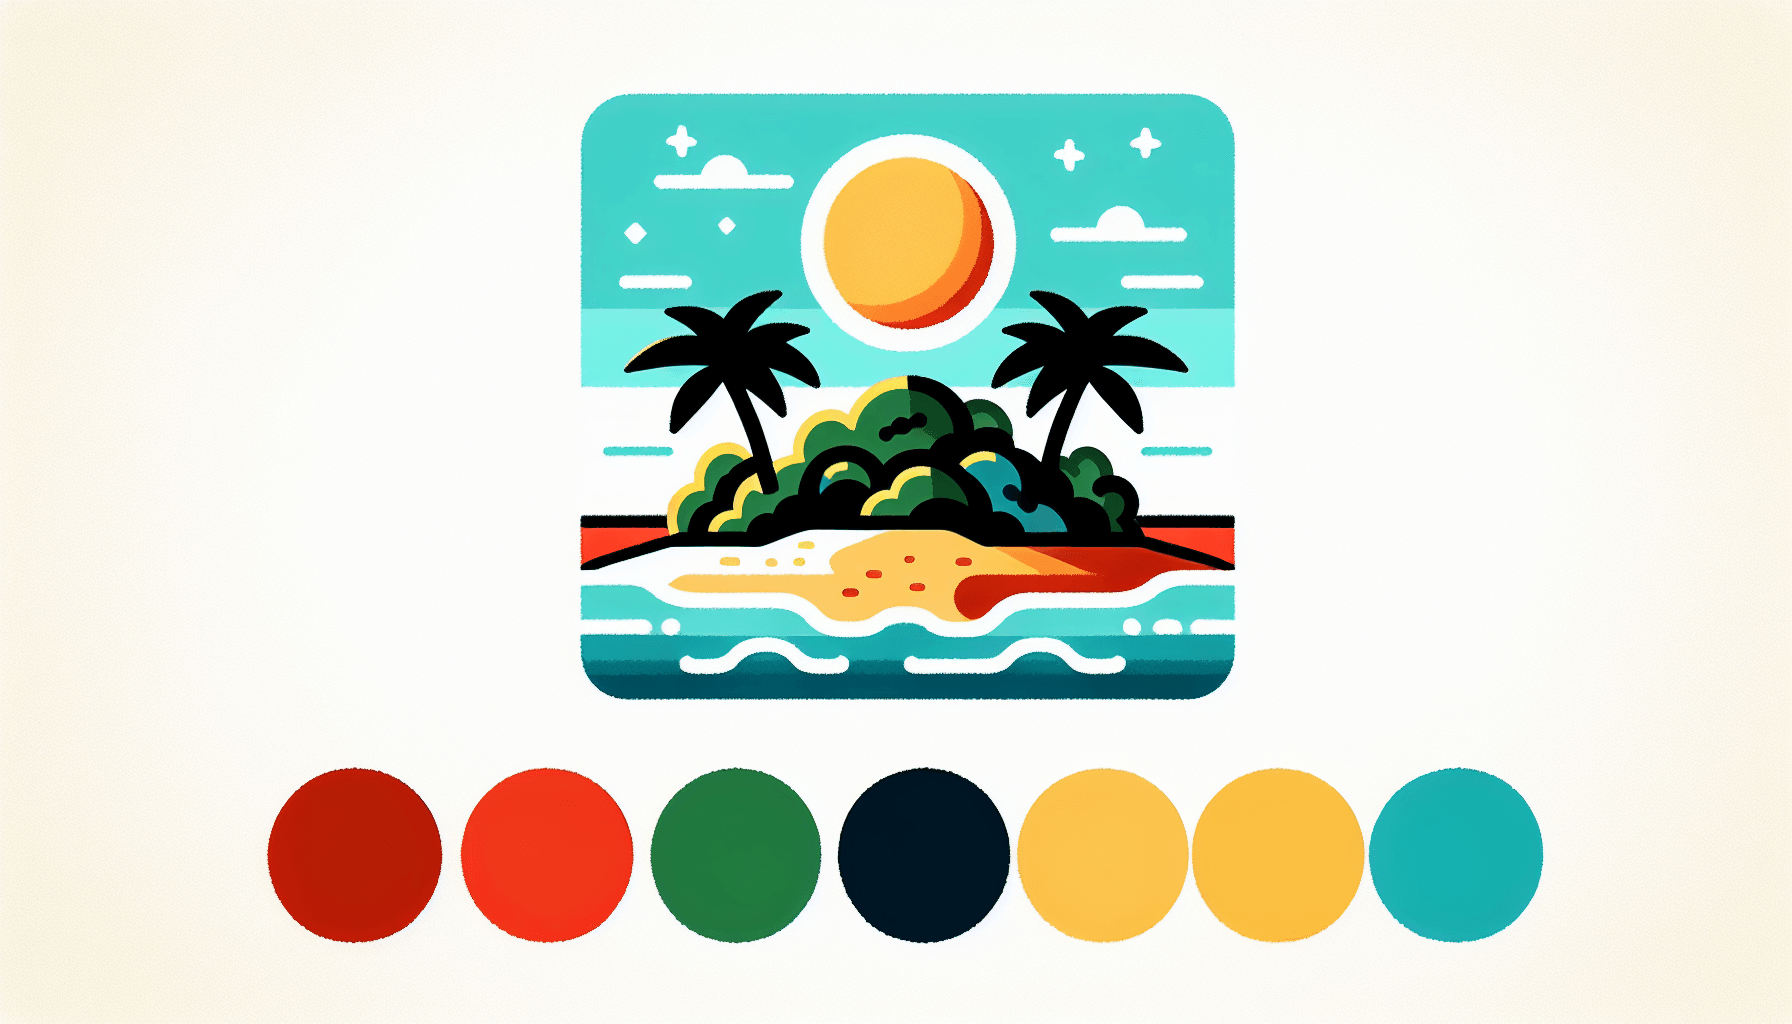 Island in flat illustration style and white background, red #f47574, green #88c7a8, yellow #fcc44b, and blue #645bc8 colors.